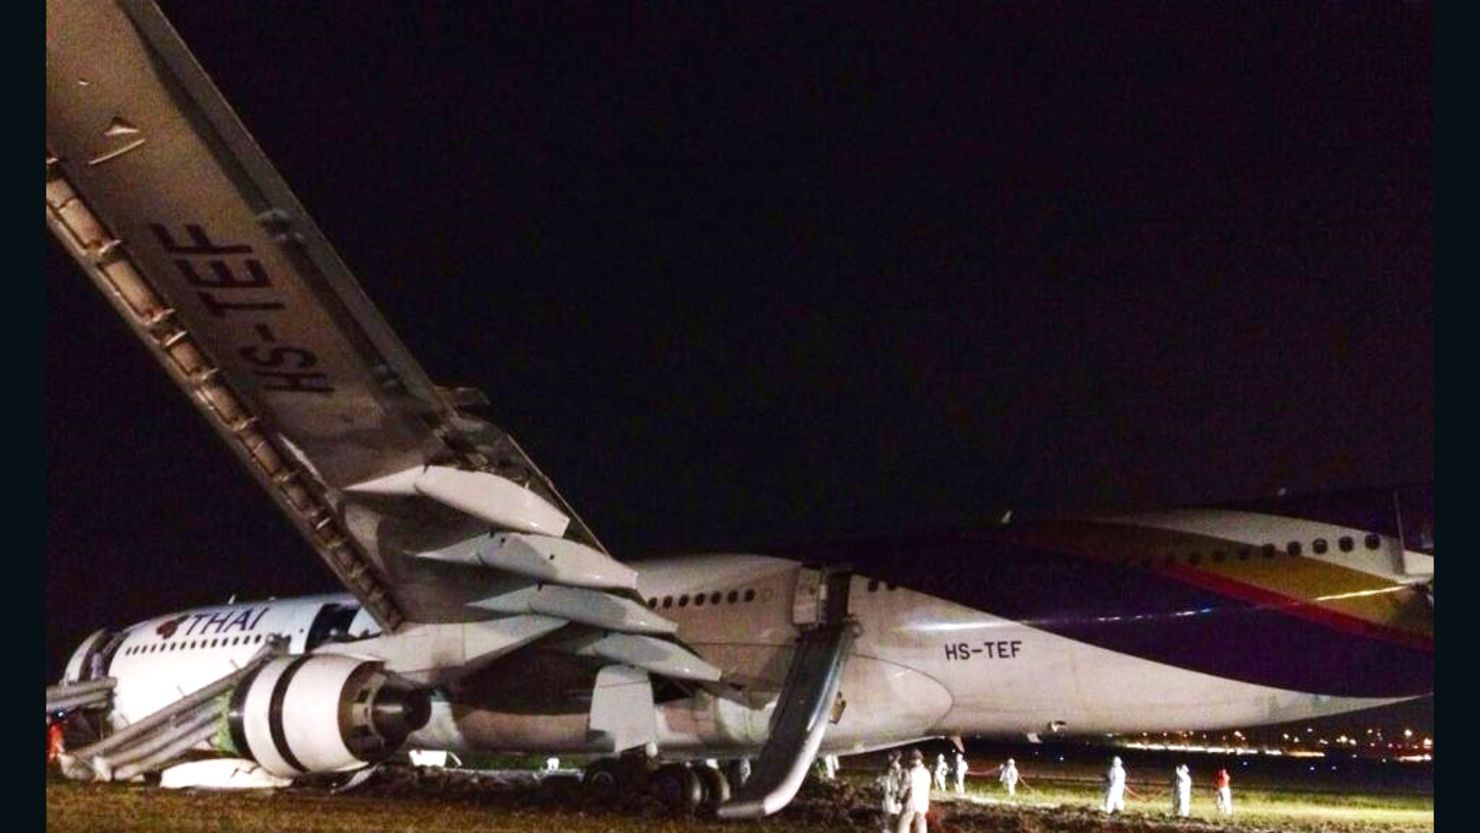 Thai Airways says a landing gear malfunction caused its Airbus A330-300 to skid off the runway after landing in Bangkok. 